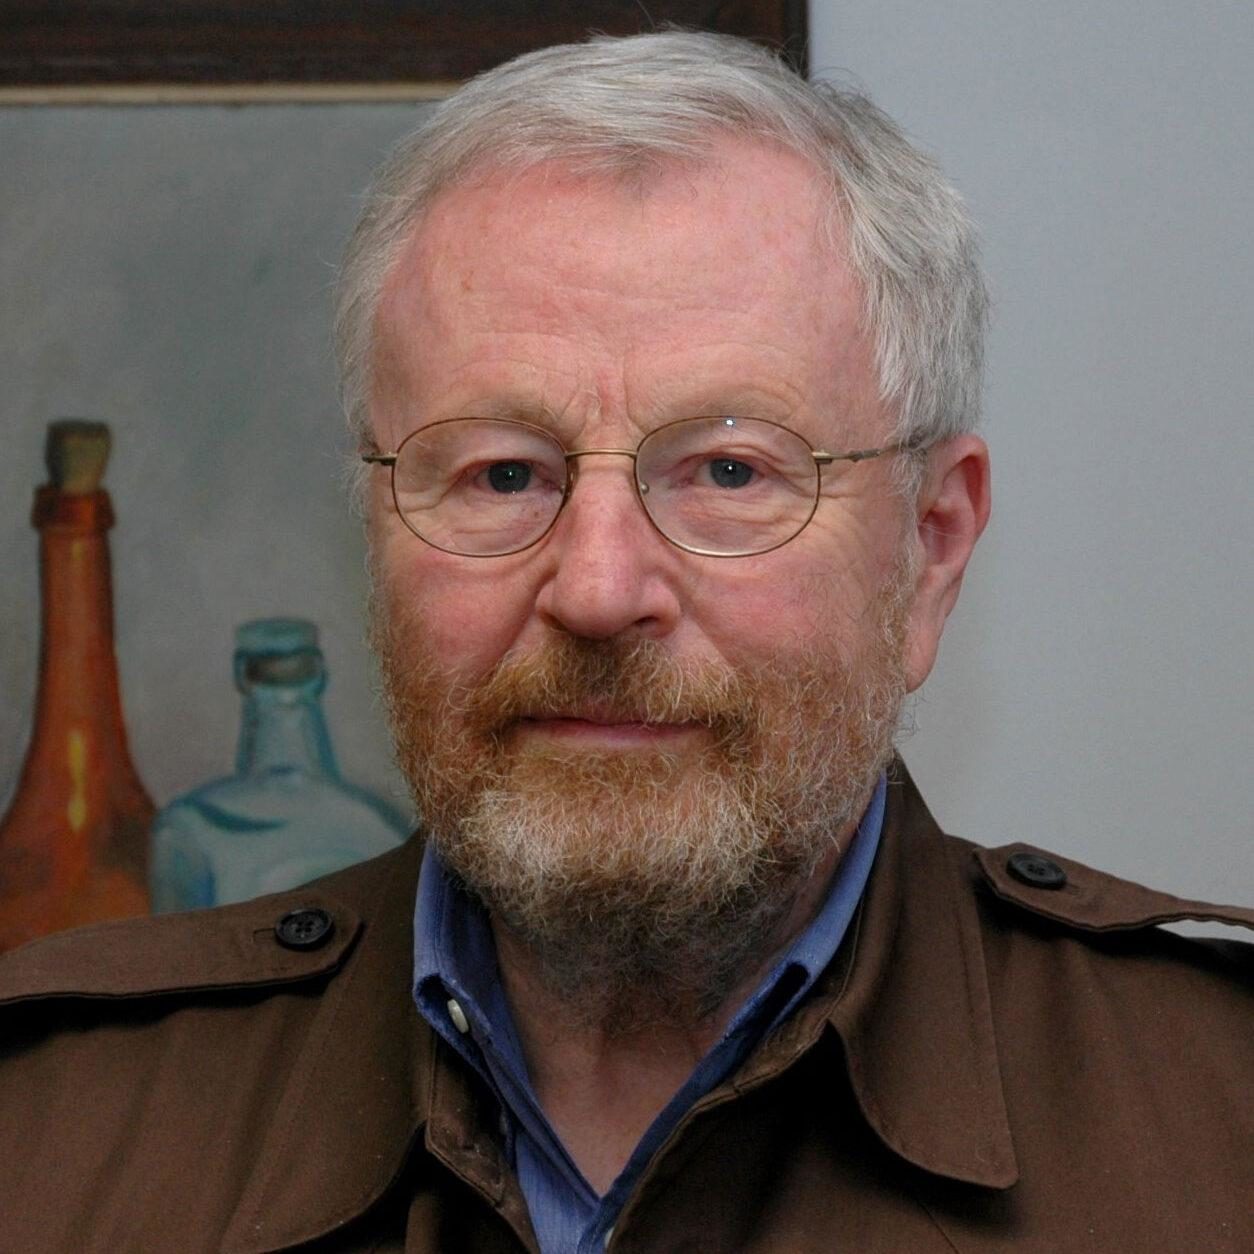 An older white man with a beard and glasses wearing a brown collered jacket stares out at the camera, in front of a still life of bottles.